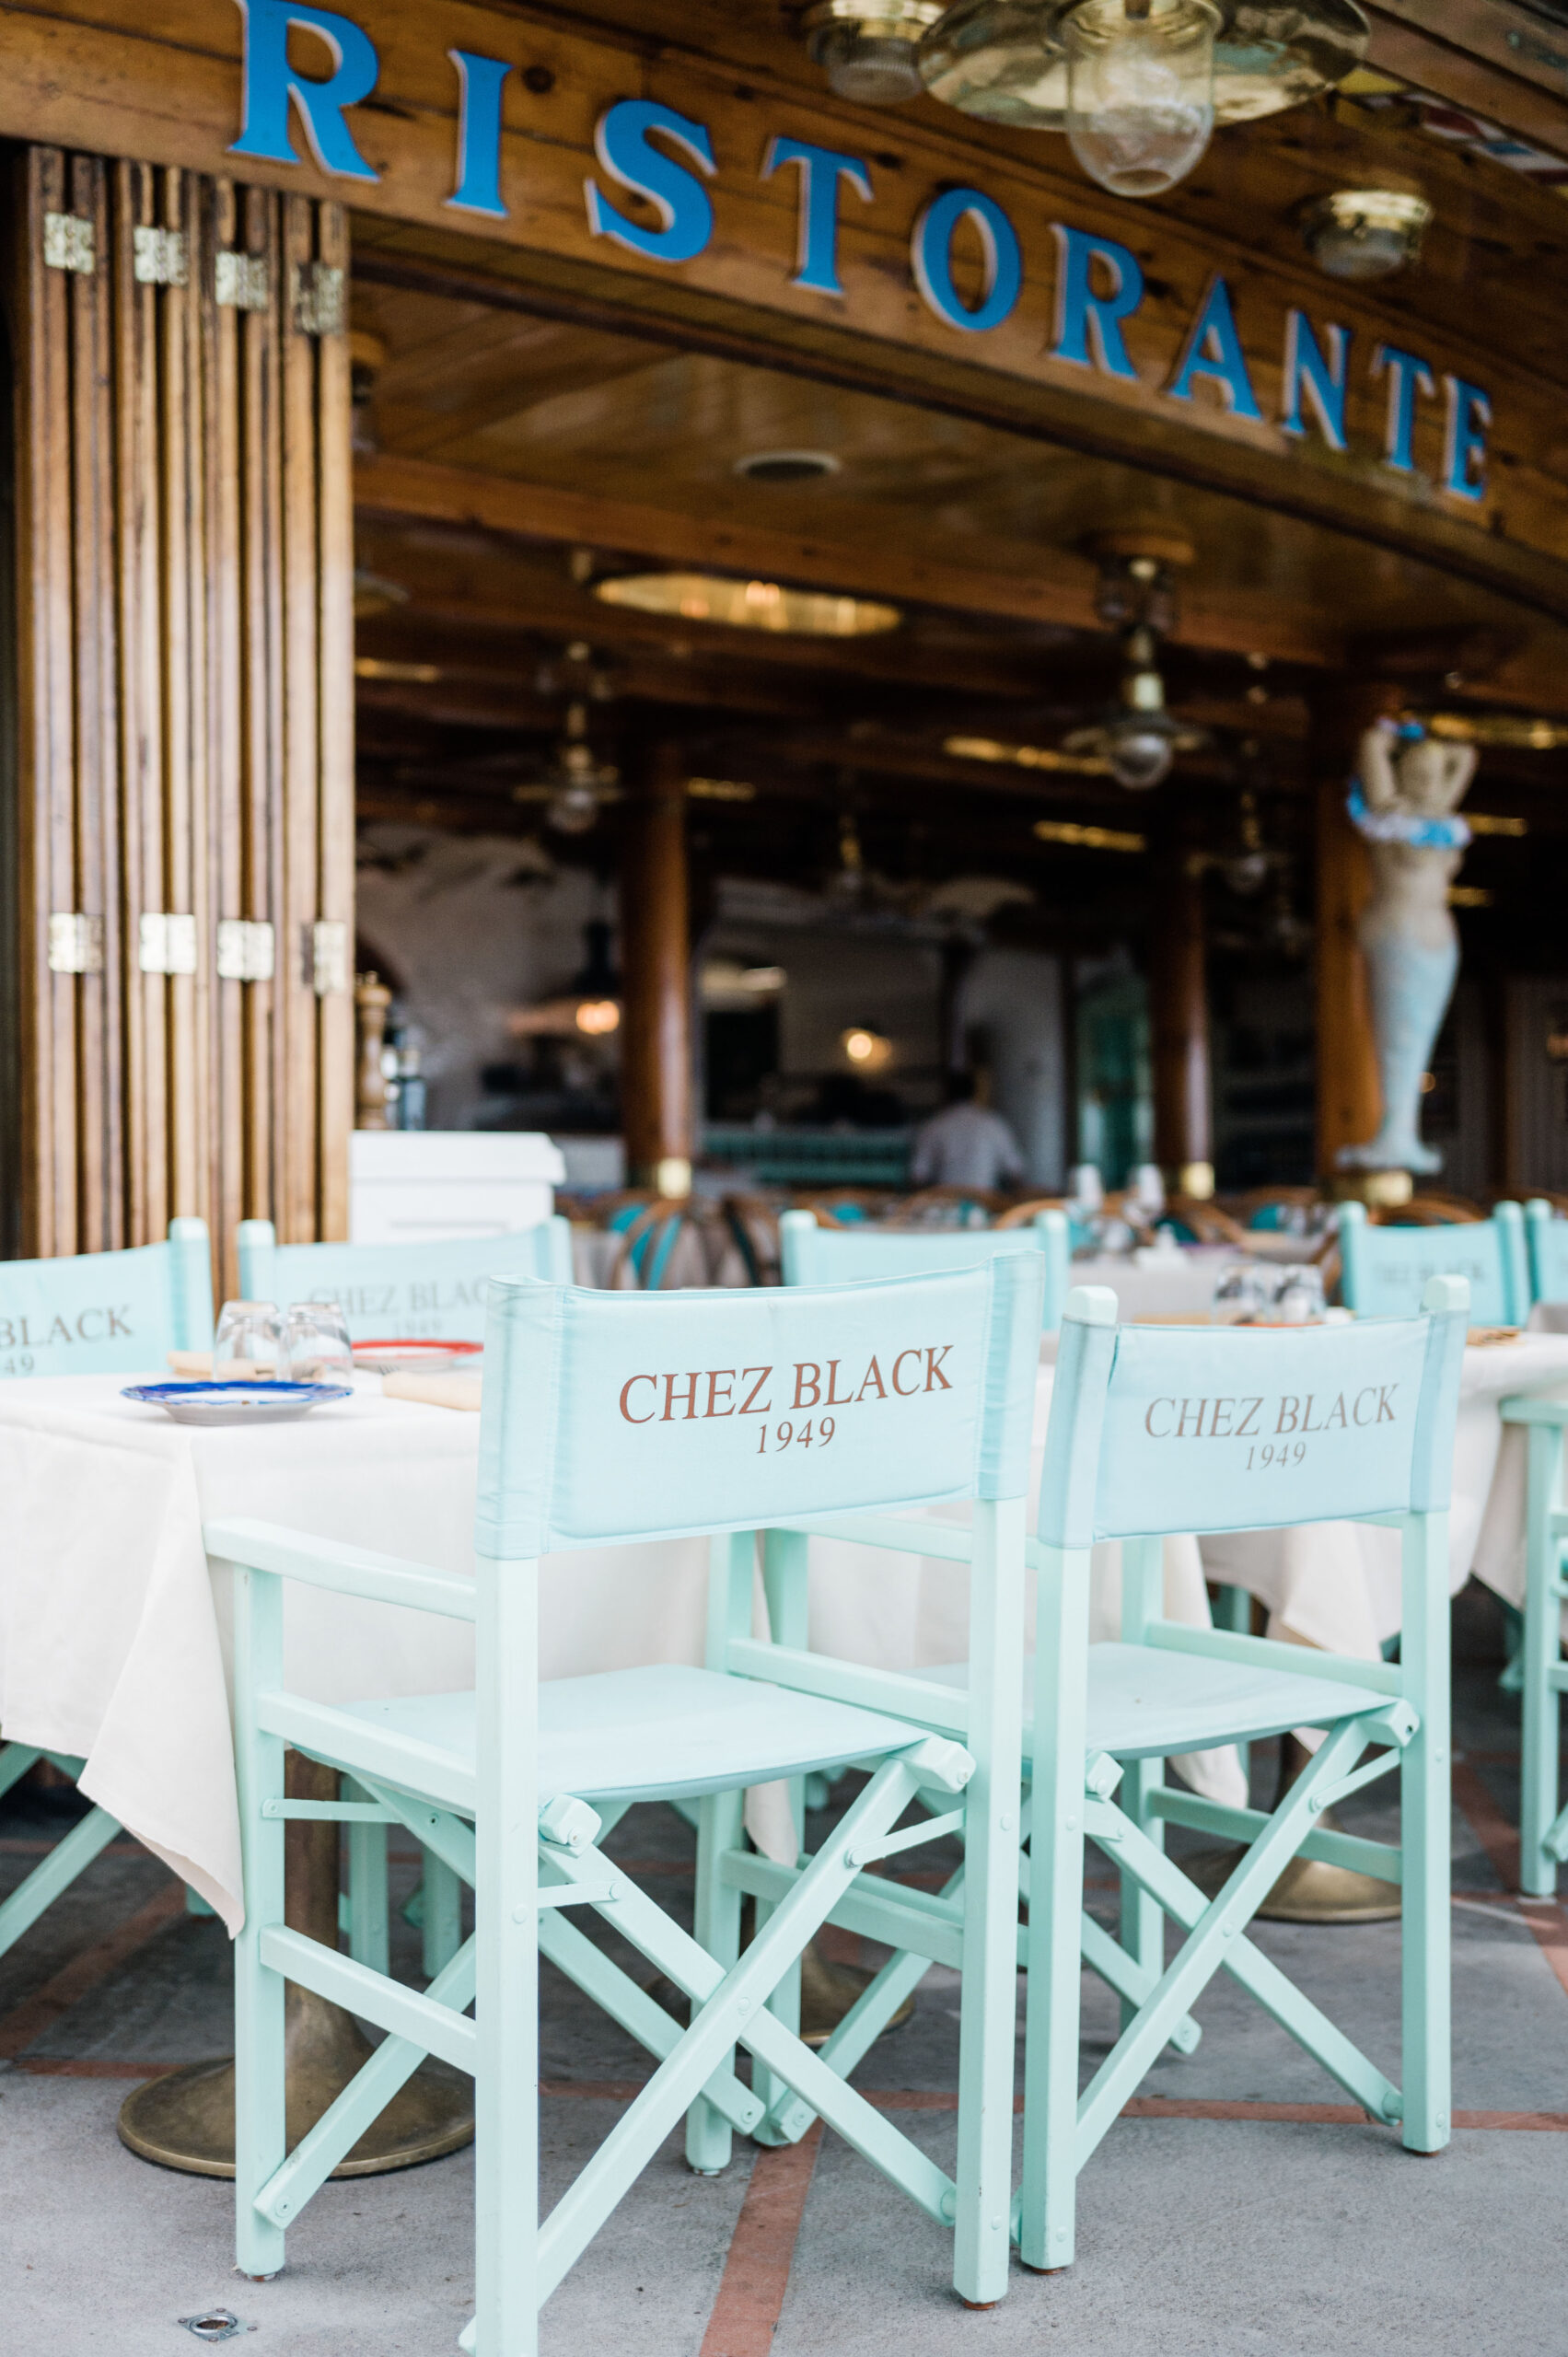 View of the chairs at Chex Black, tiffany blue with Chez Black in gold letters, best places to eat positano